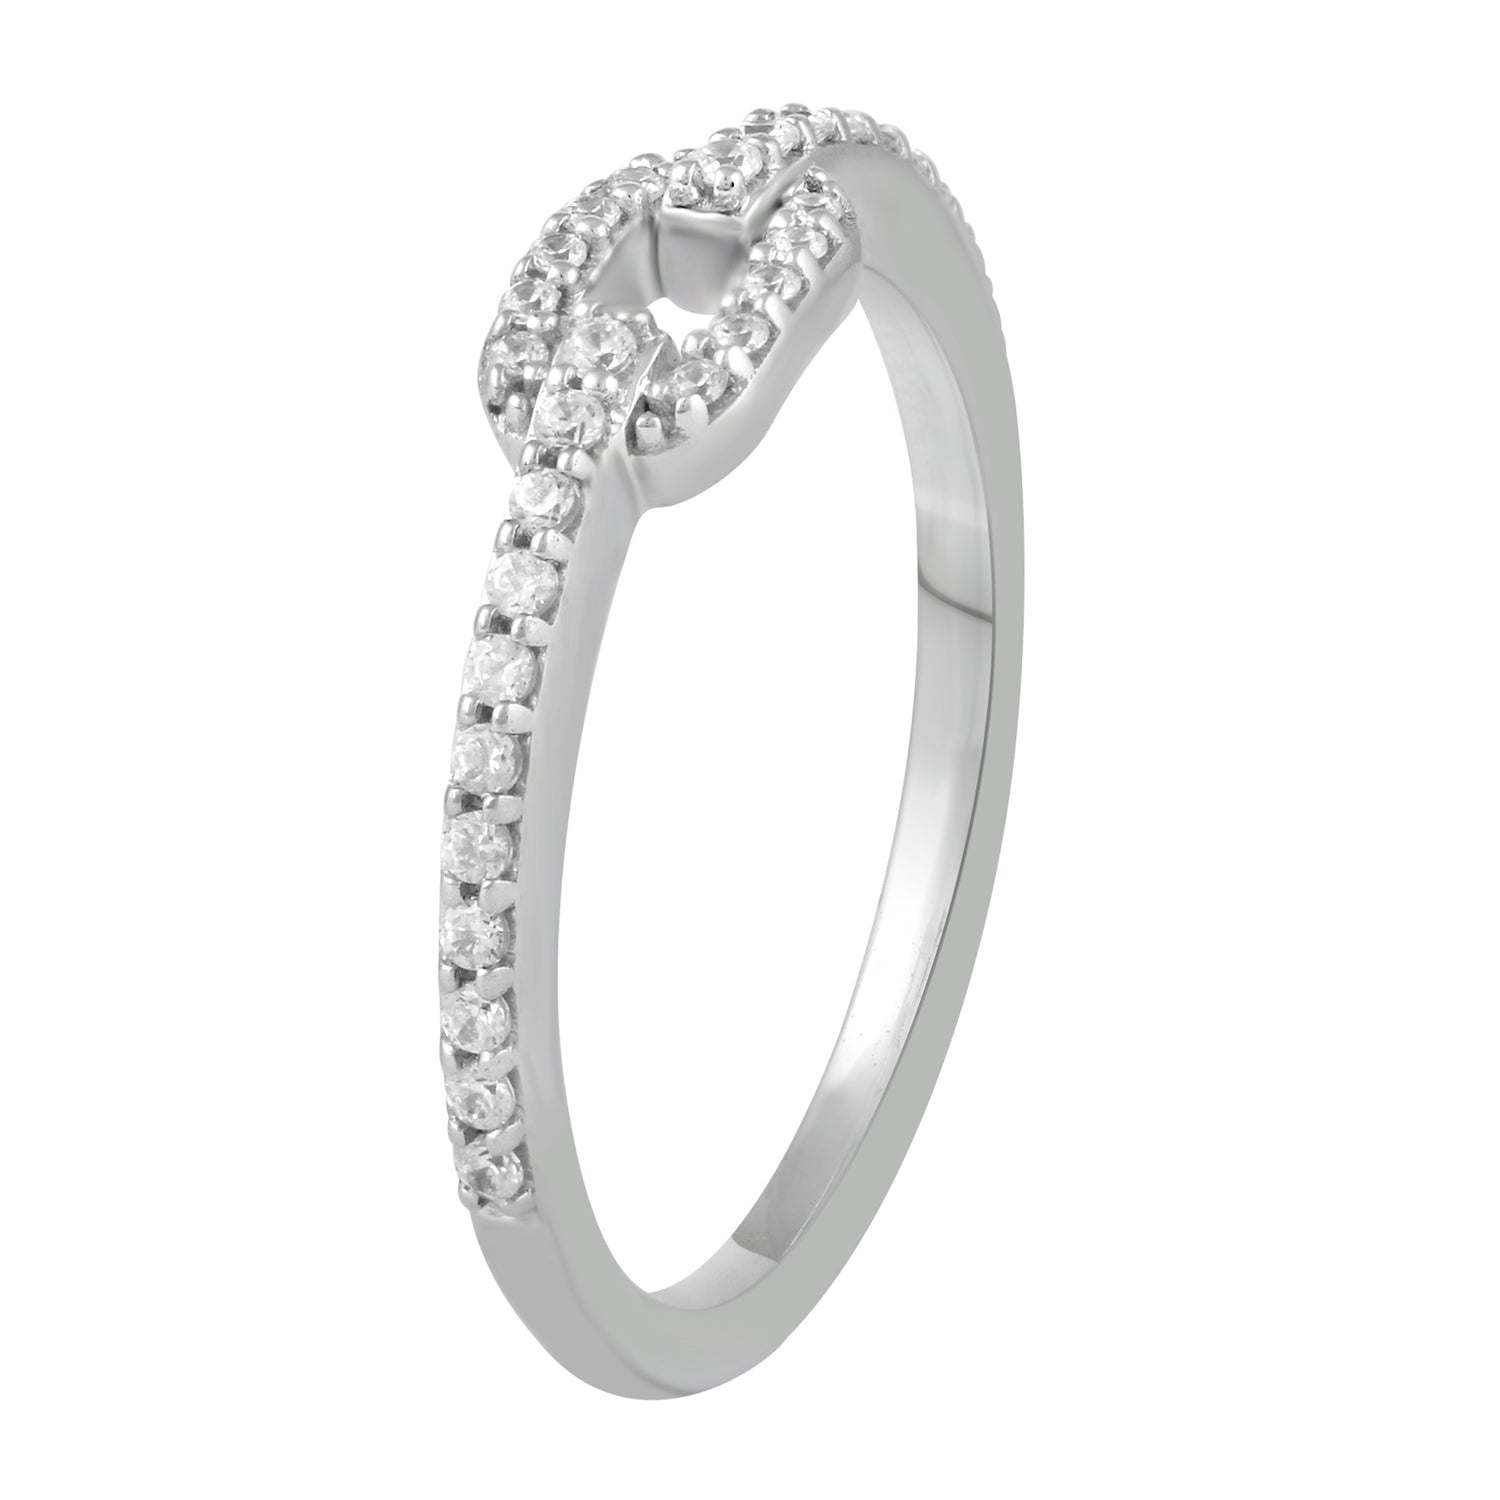 1/4Ct TW Diamond Single Chain Link Ring in Sterling Silver